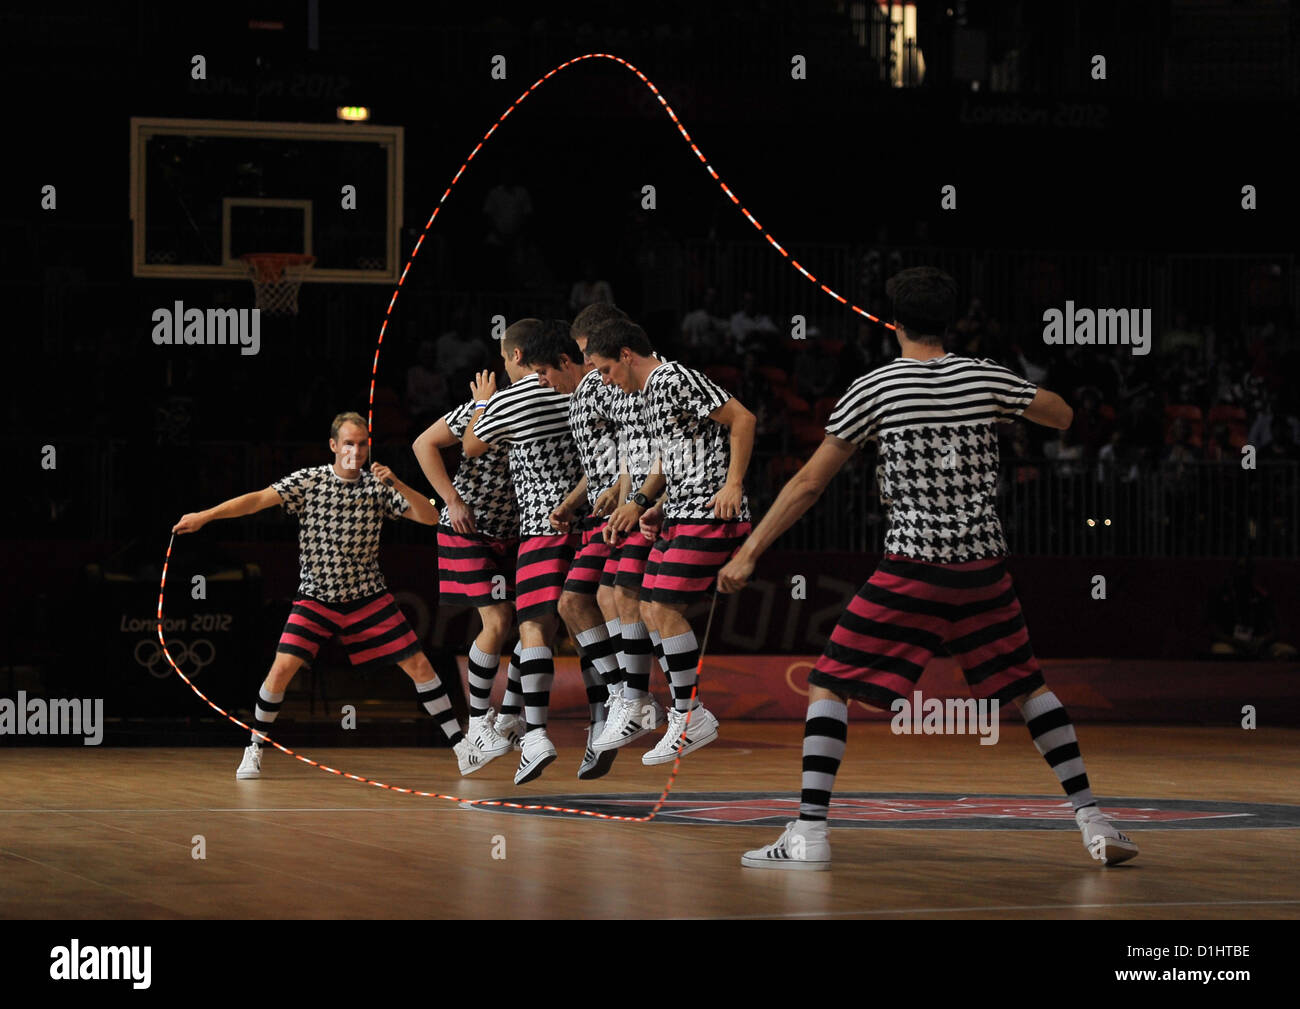 Entertainment is provided throughout the game. USA Vs TUR Womens Basketball Stock Photo